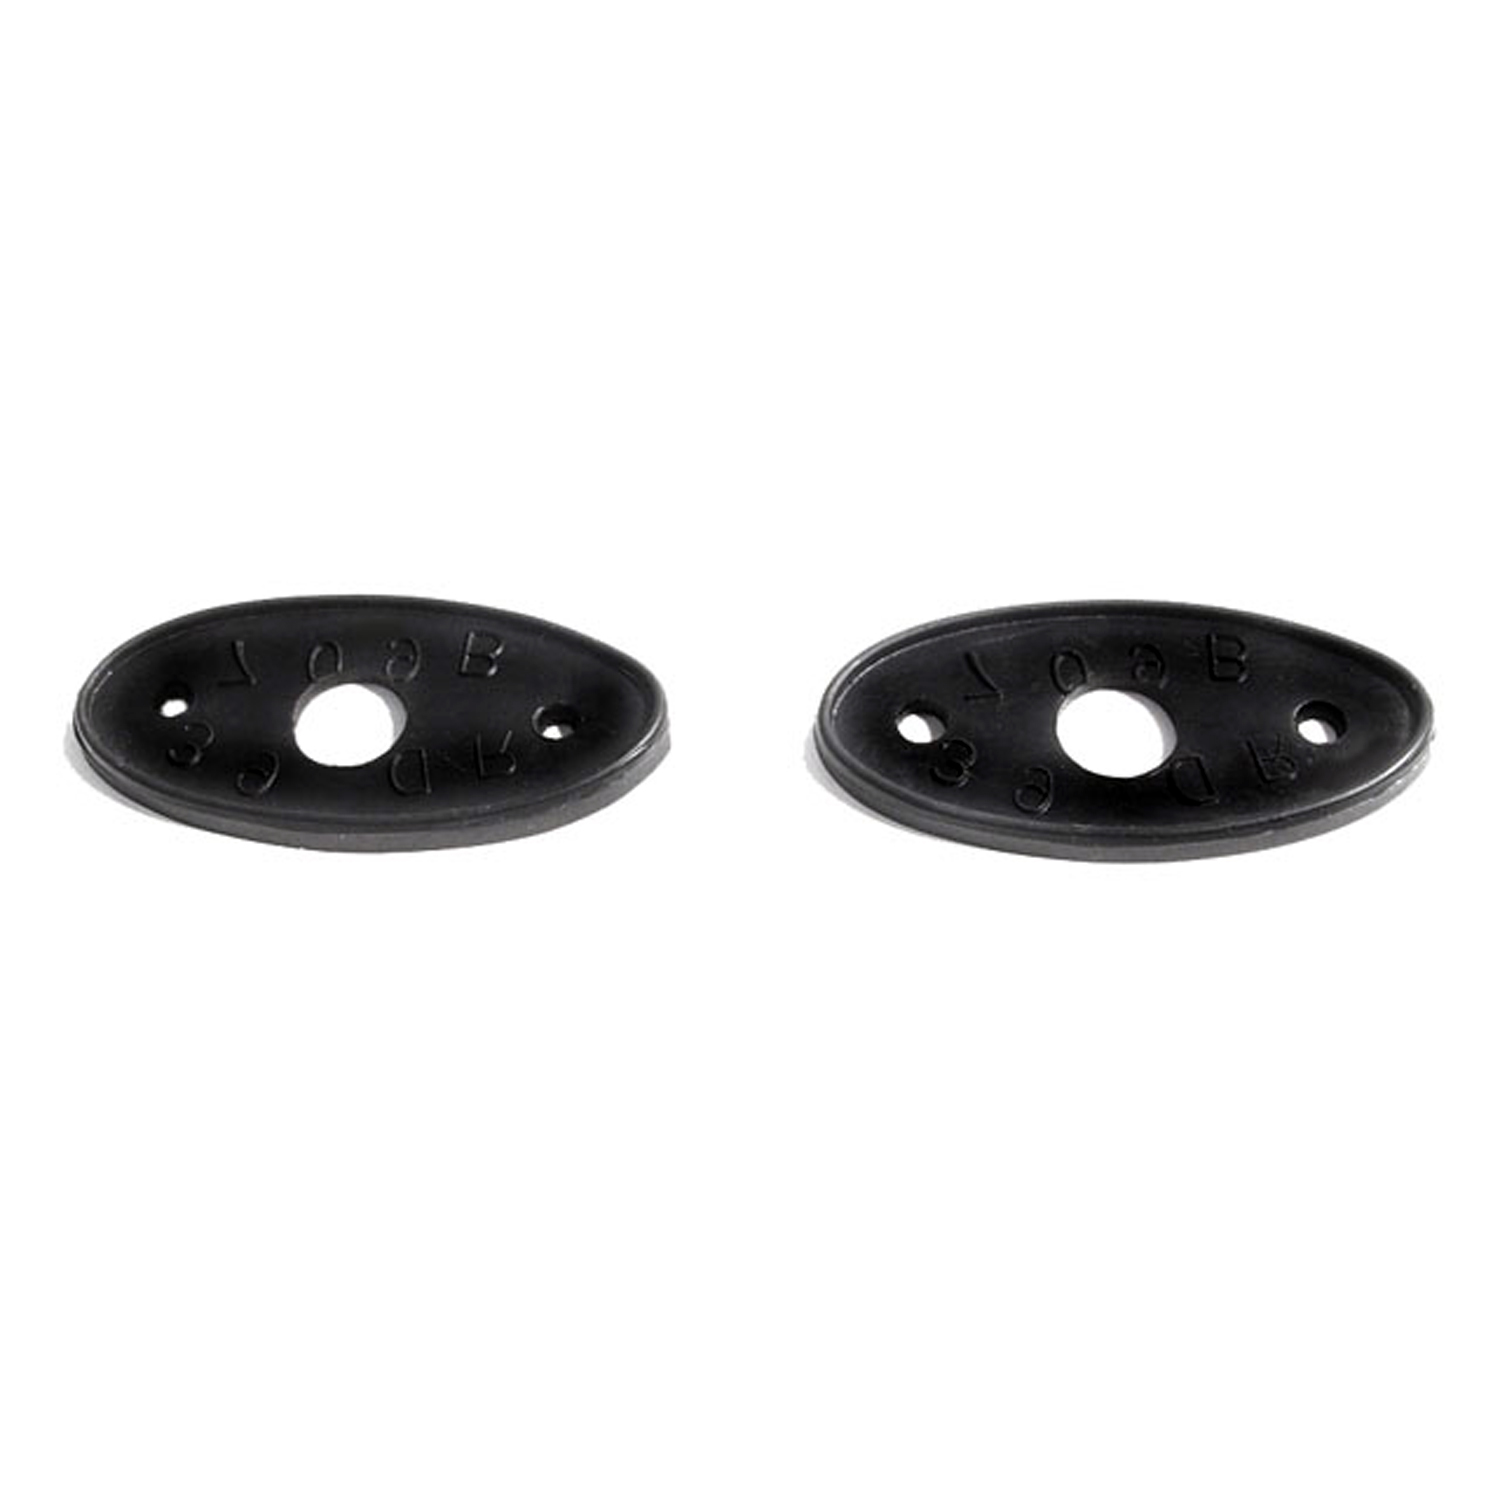 1939 Ford Deluxe Door Handle Pads.  1-1/4 wide X 2-3/8 long.  Pair-MP 709-B